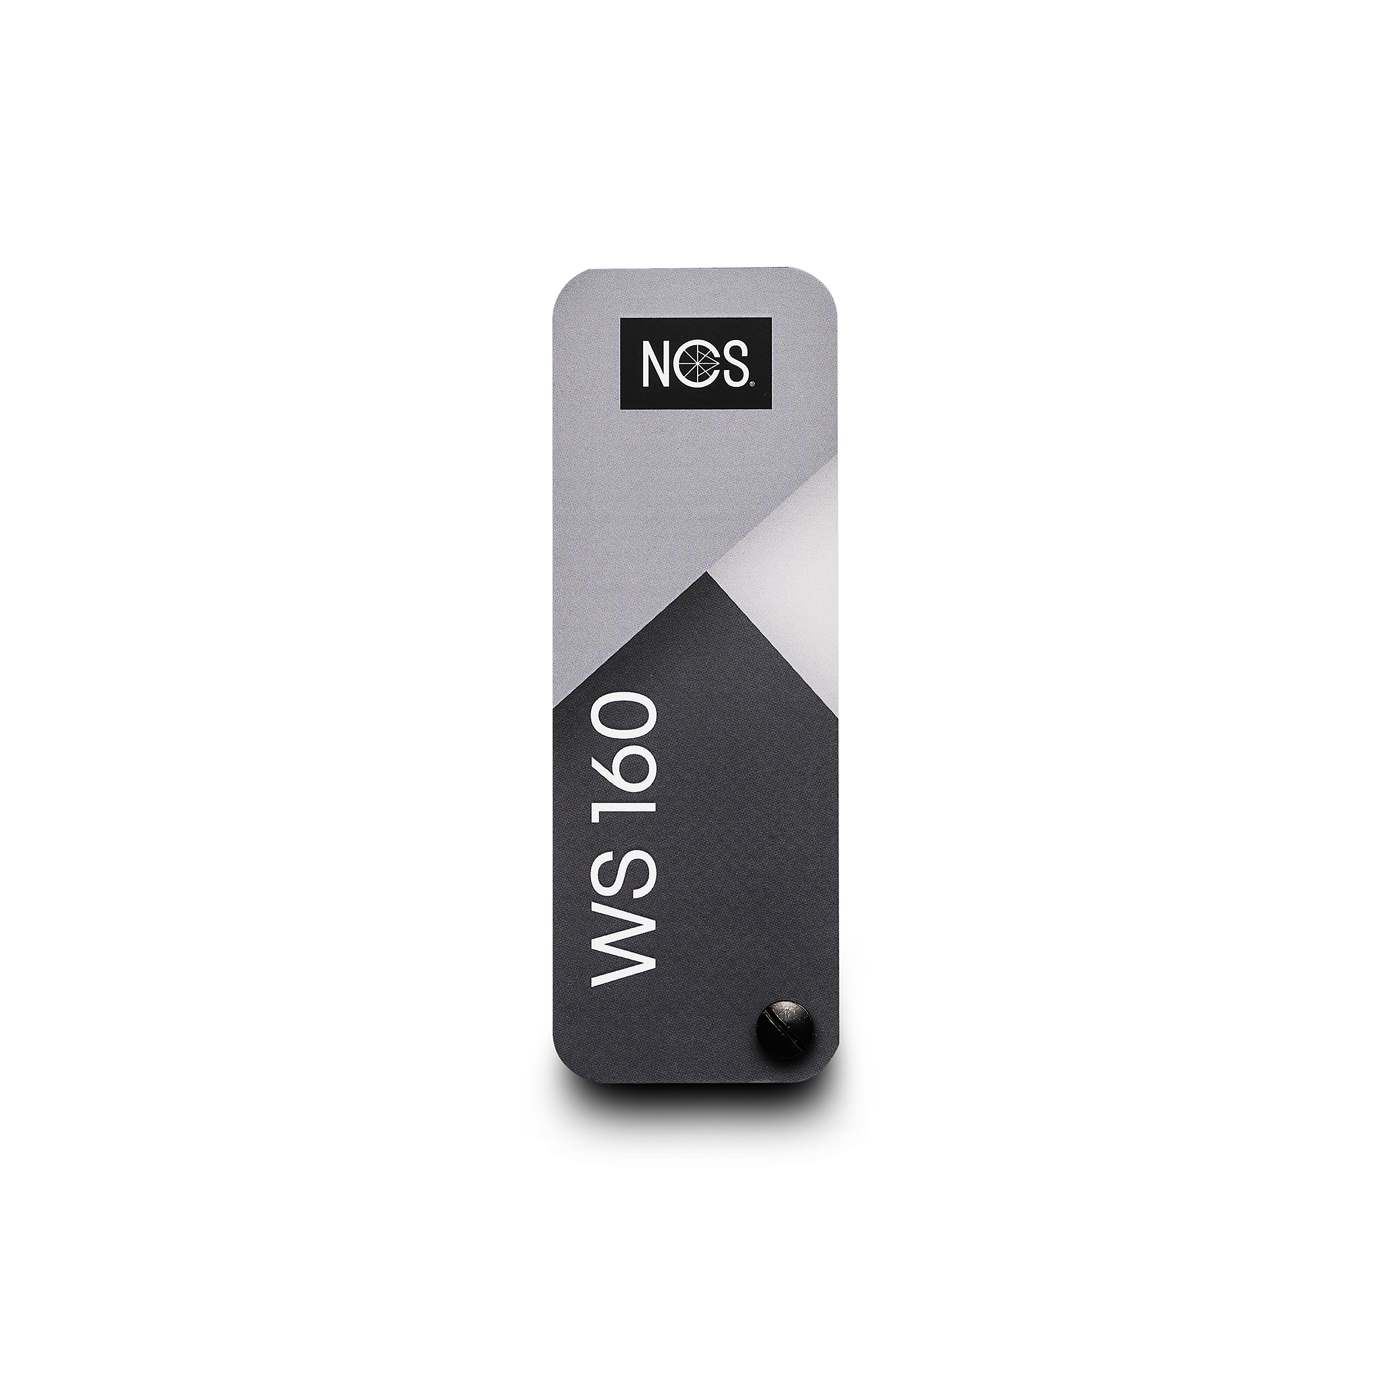 NCS WS160